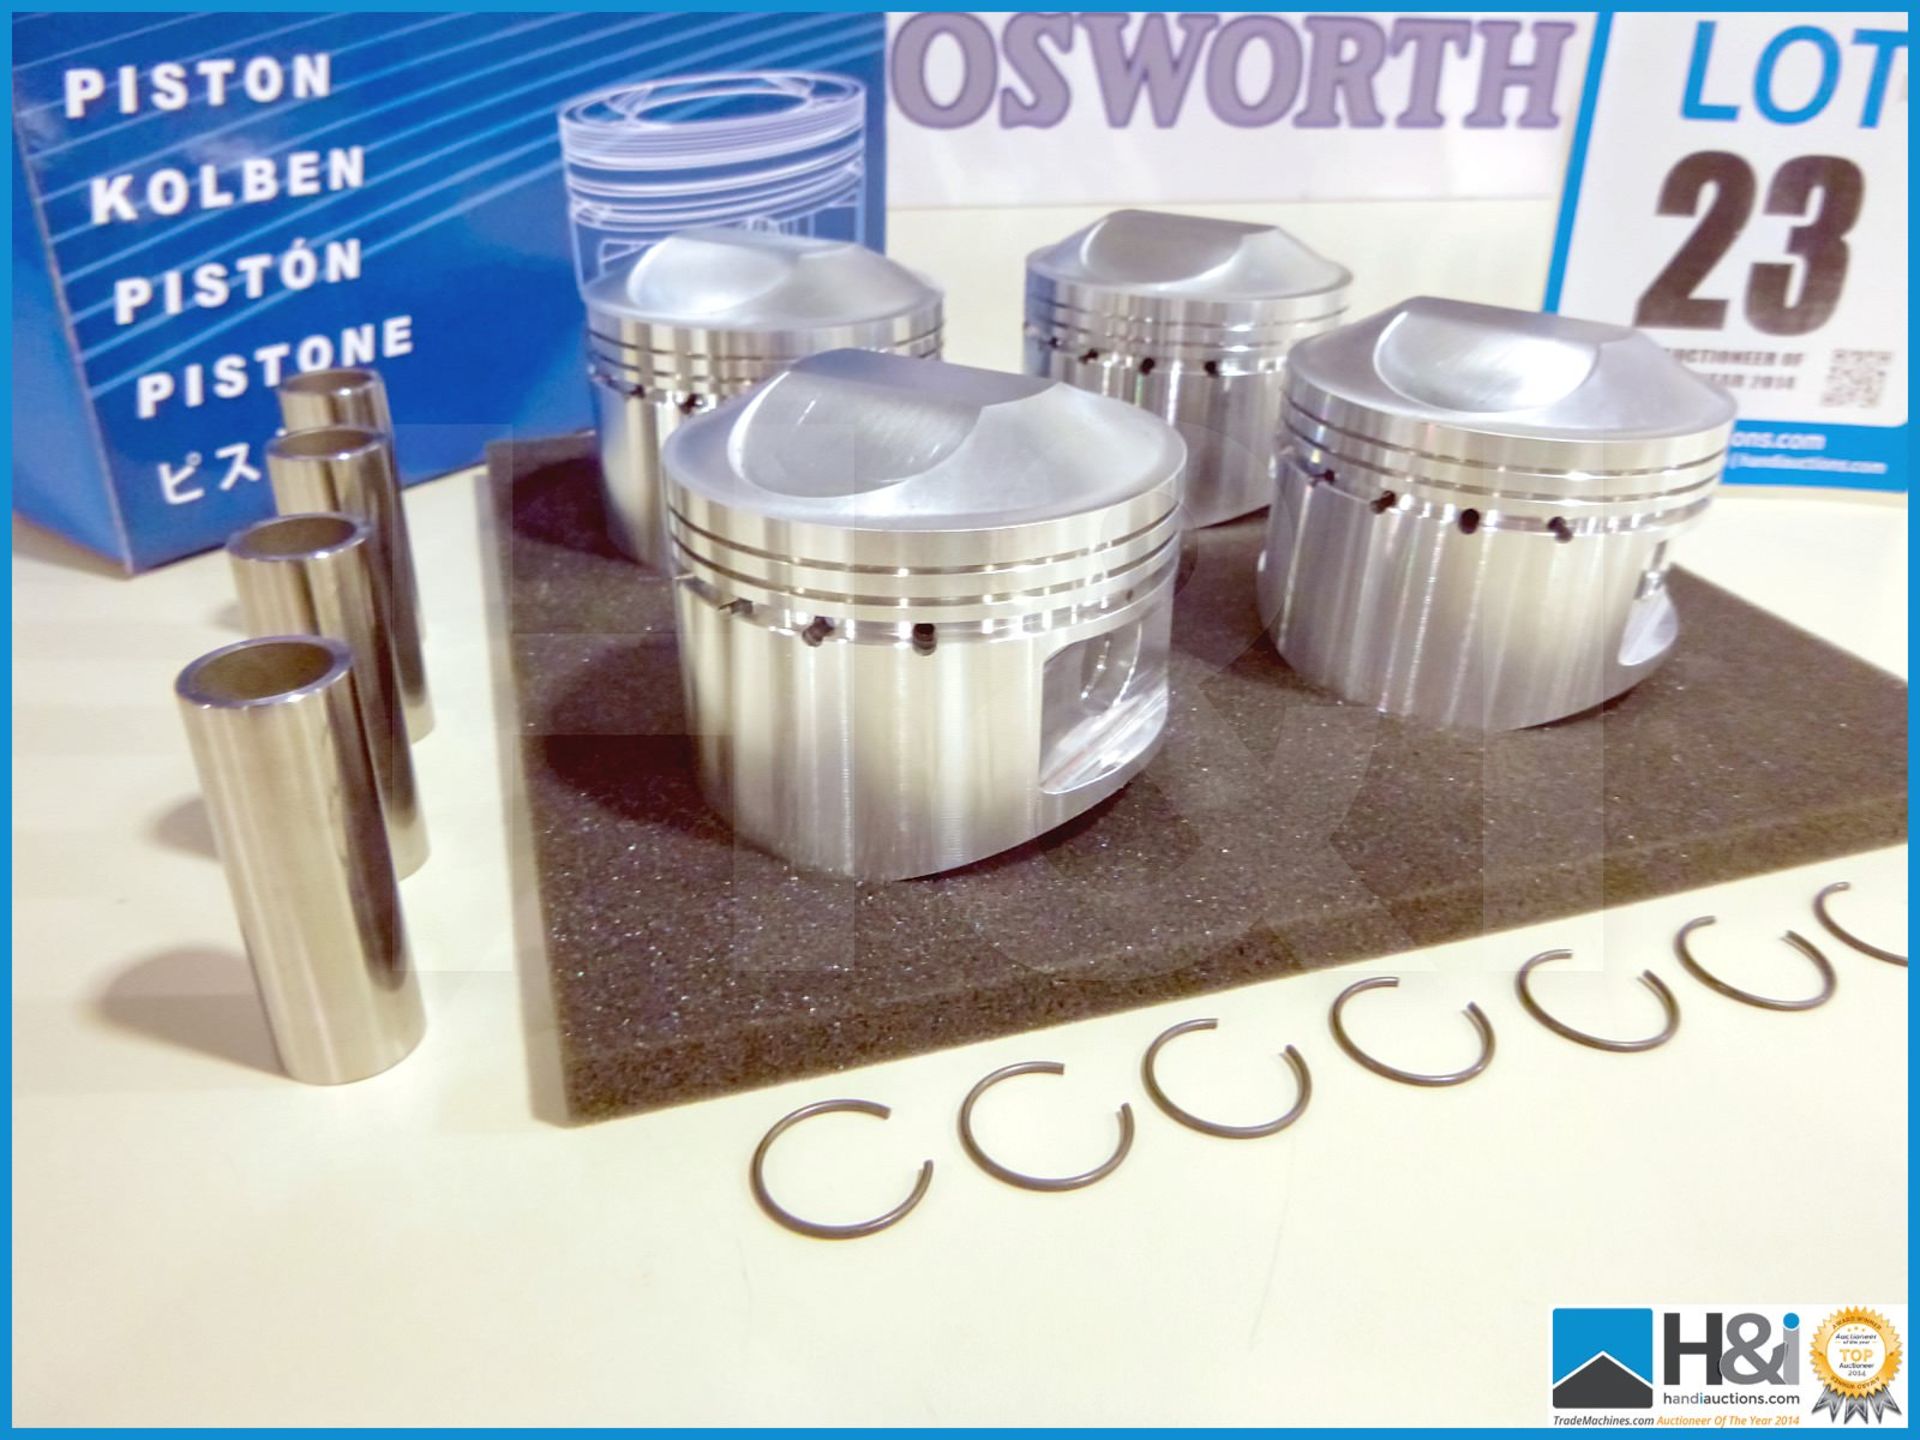 9 off boxes of 4 off Kawasaki piston & clips, PA0858. Kawasaki GPZ1100 ZX. Appx lot value over GBP 4 - Image 2 of 6